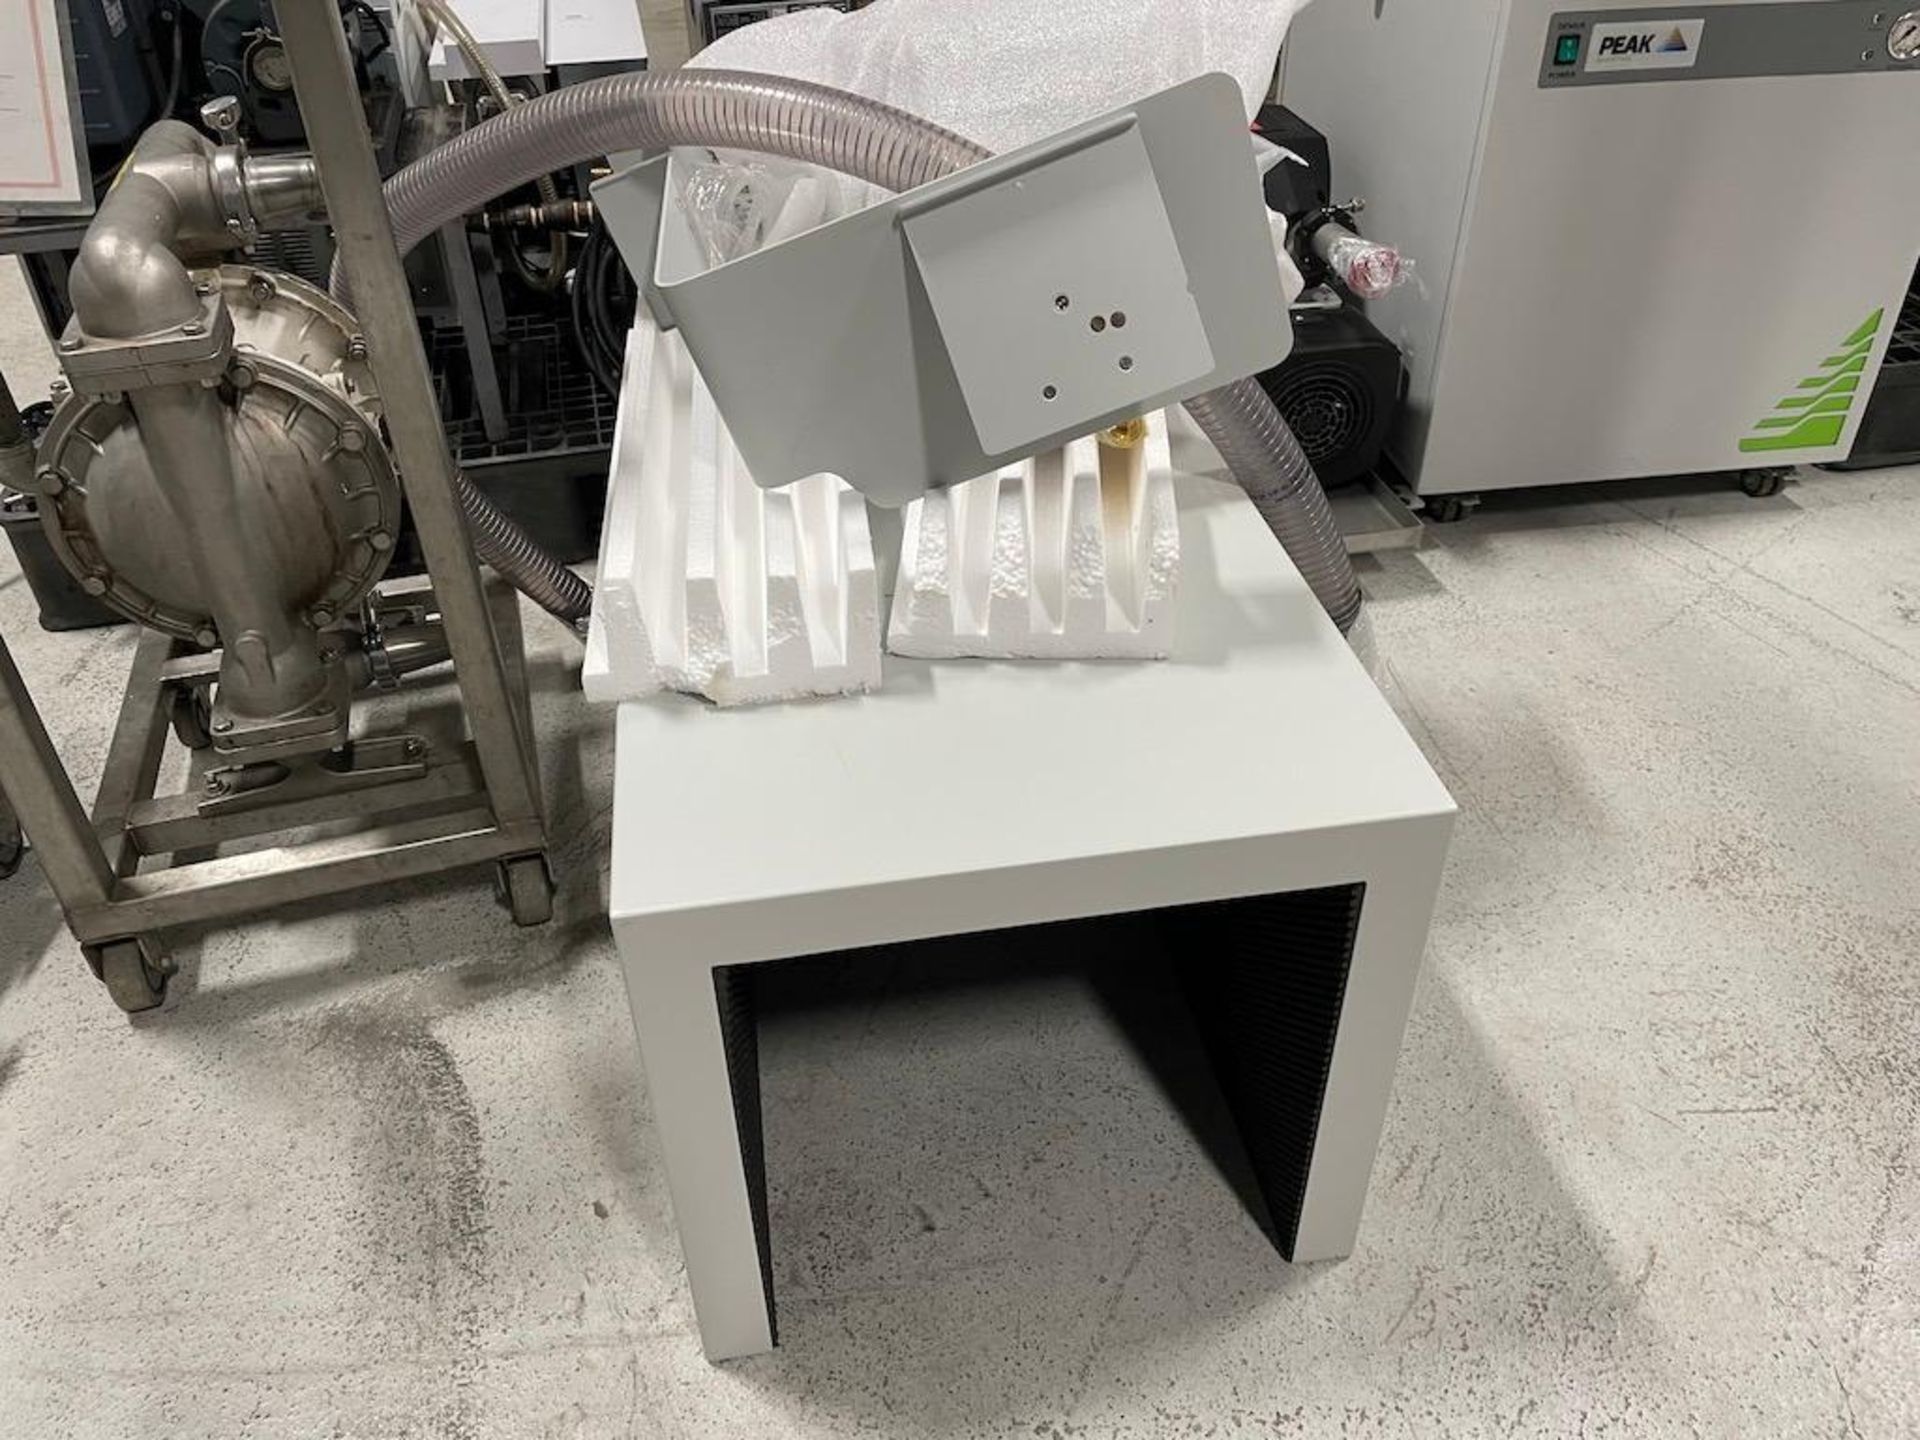 2017 THERMO SCIENTIFIC EXACTIVE SERIES MASS SPECTROMETER, MODEL Q EXACTIVE PLUS, SN 07354L, INCLUDES - Image 15 of 82